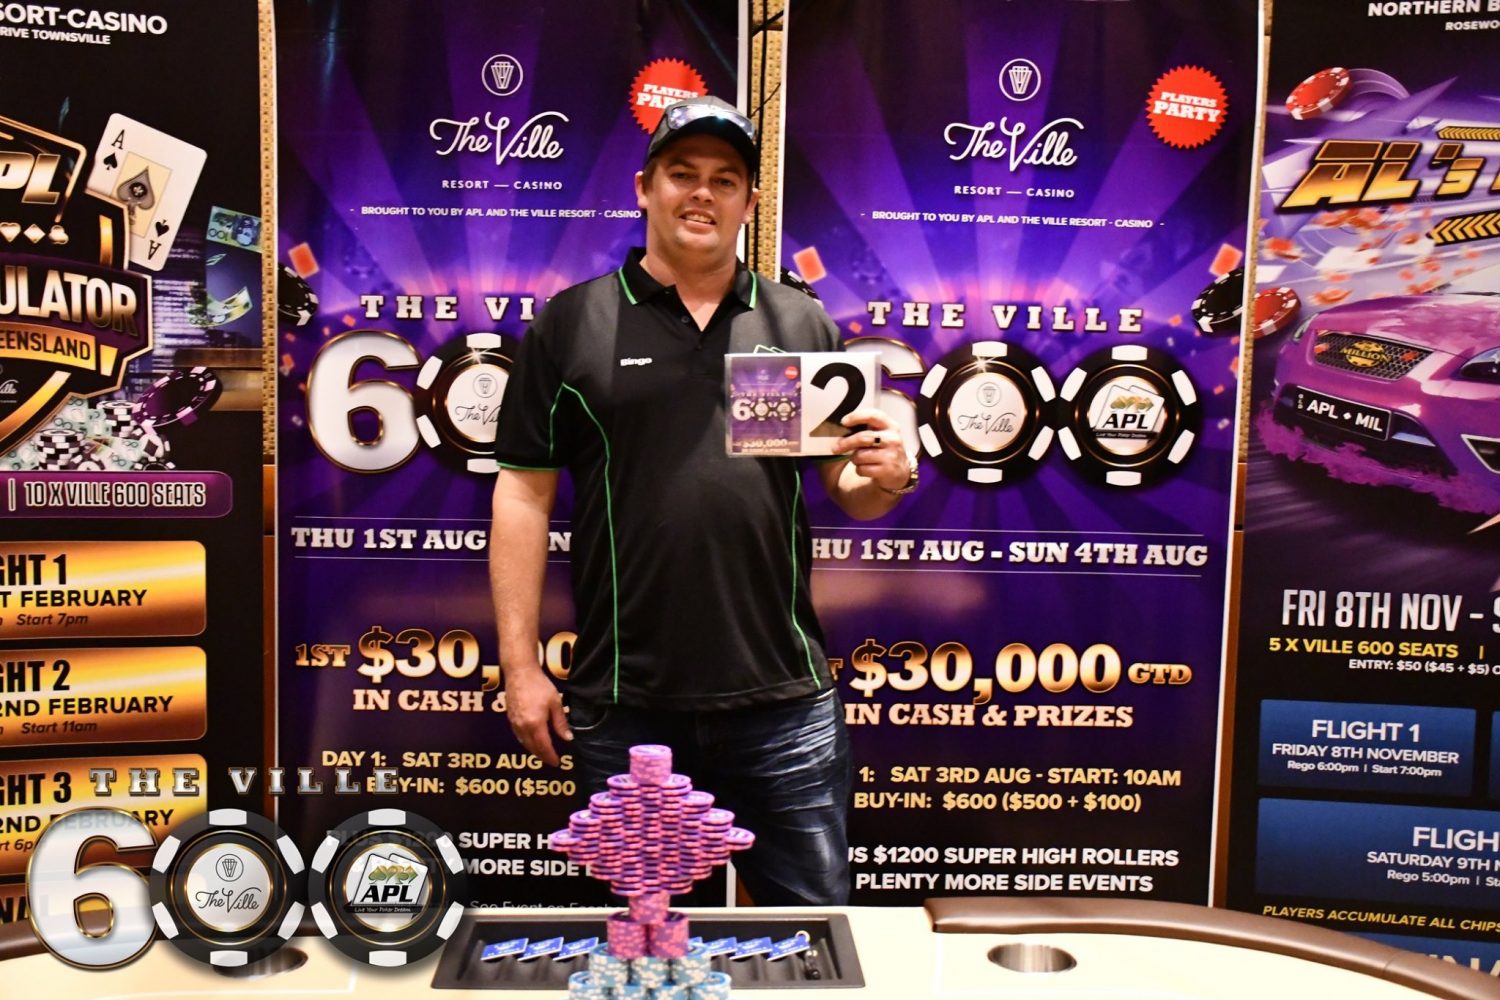 Super High Roller Troy Edwards - Perth 2nd Place $17,000 Cash